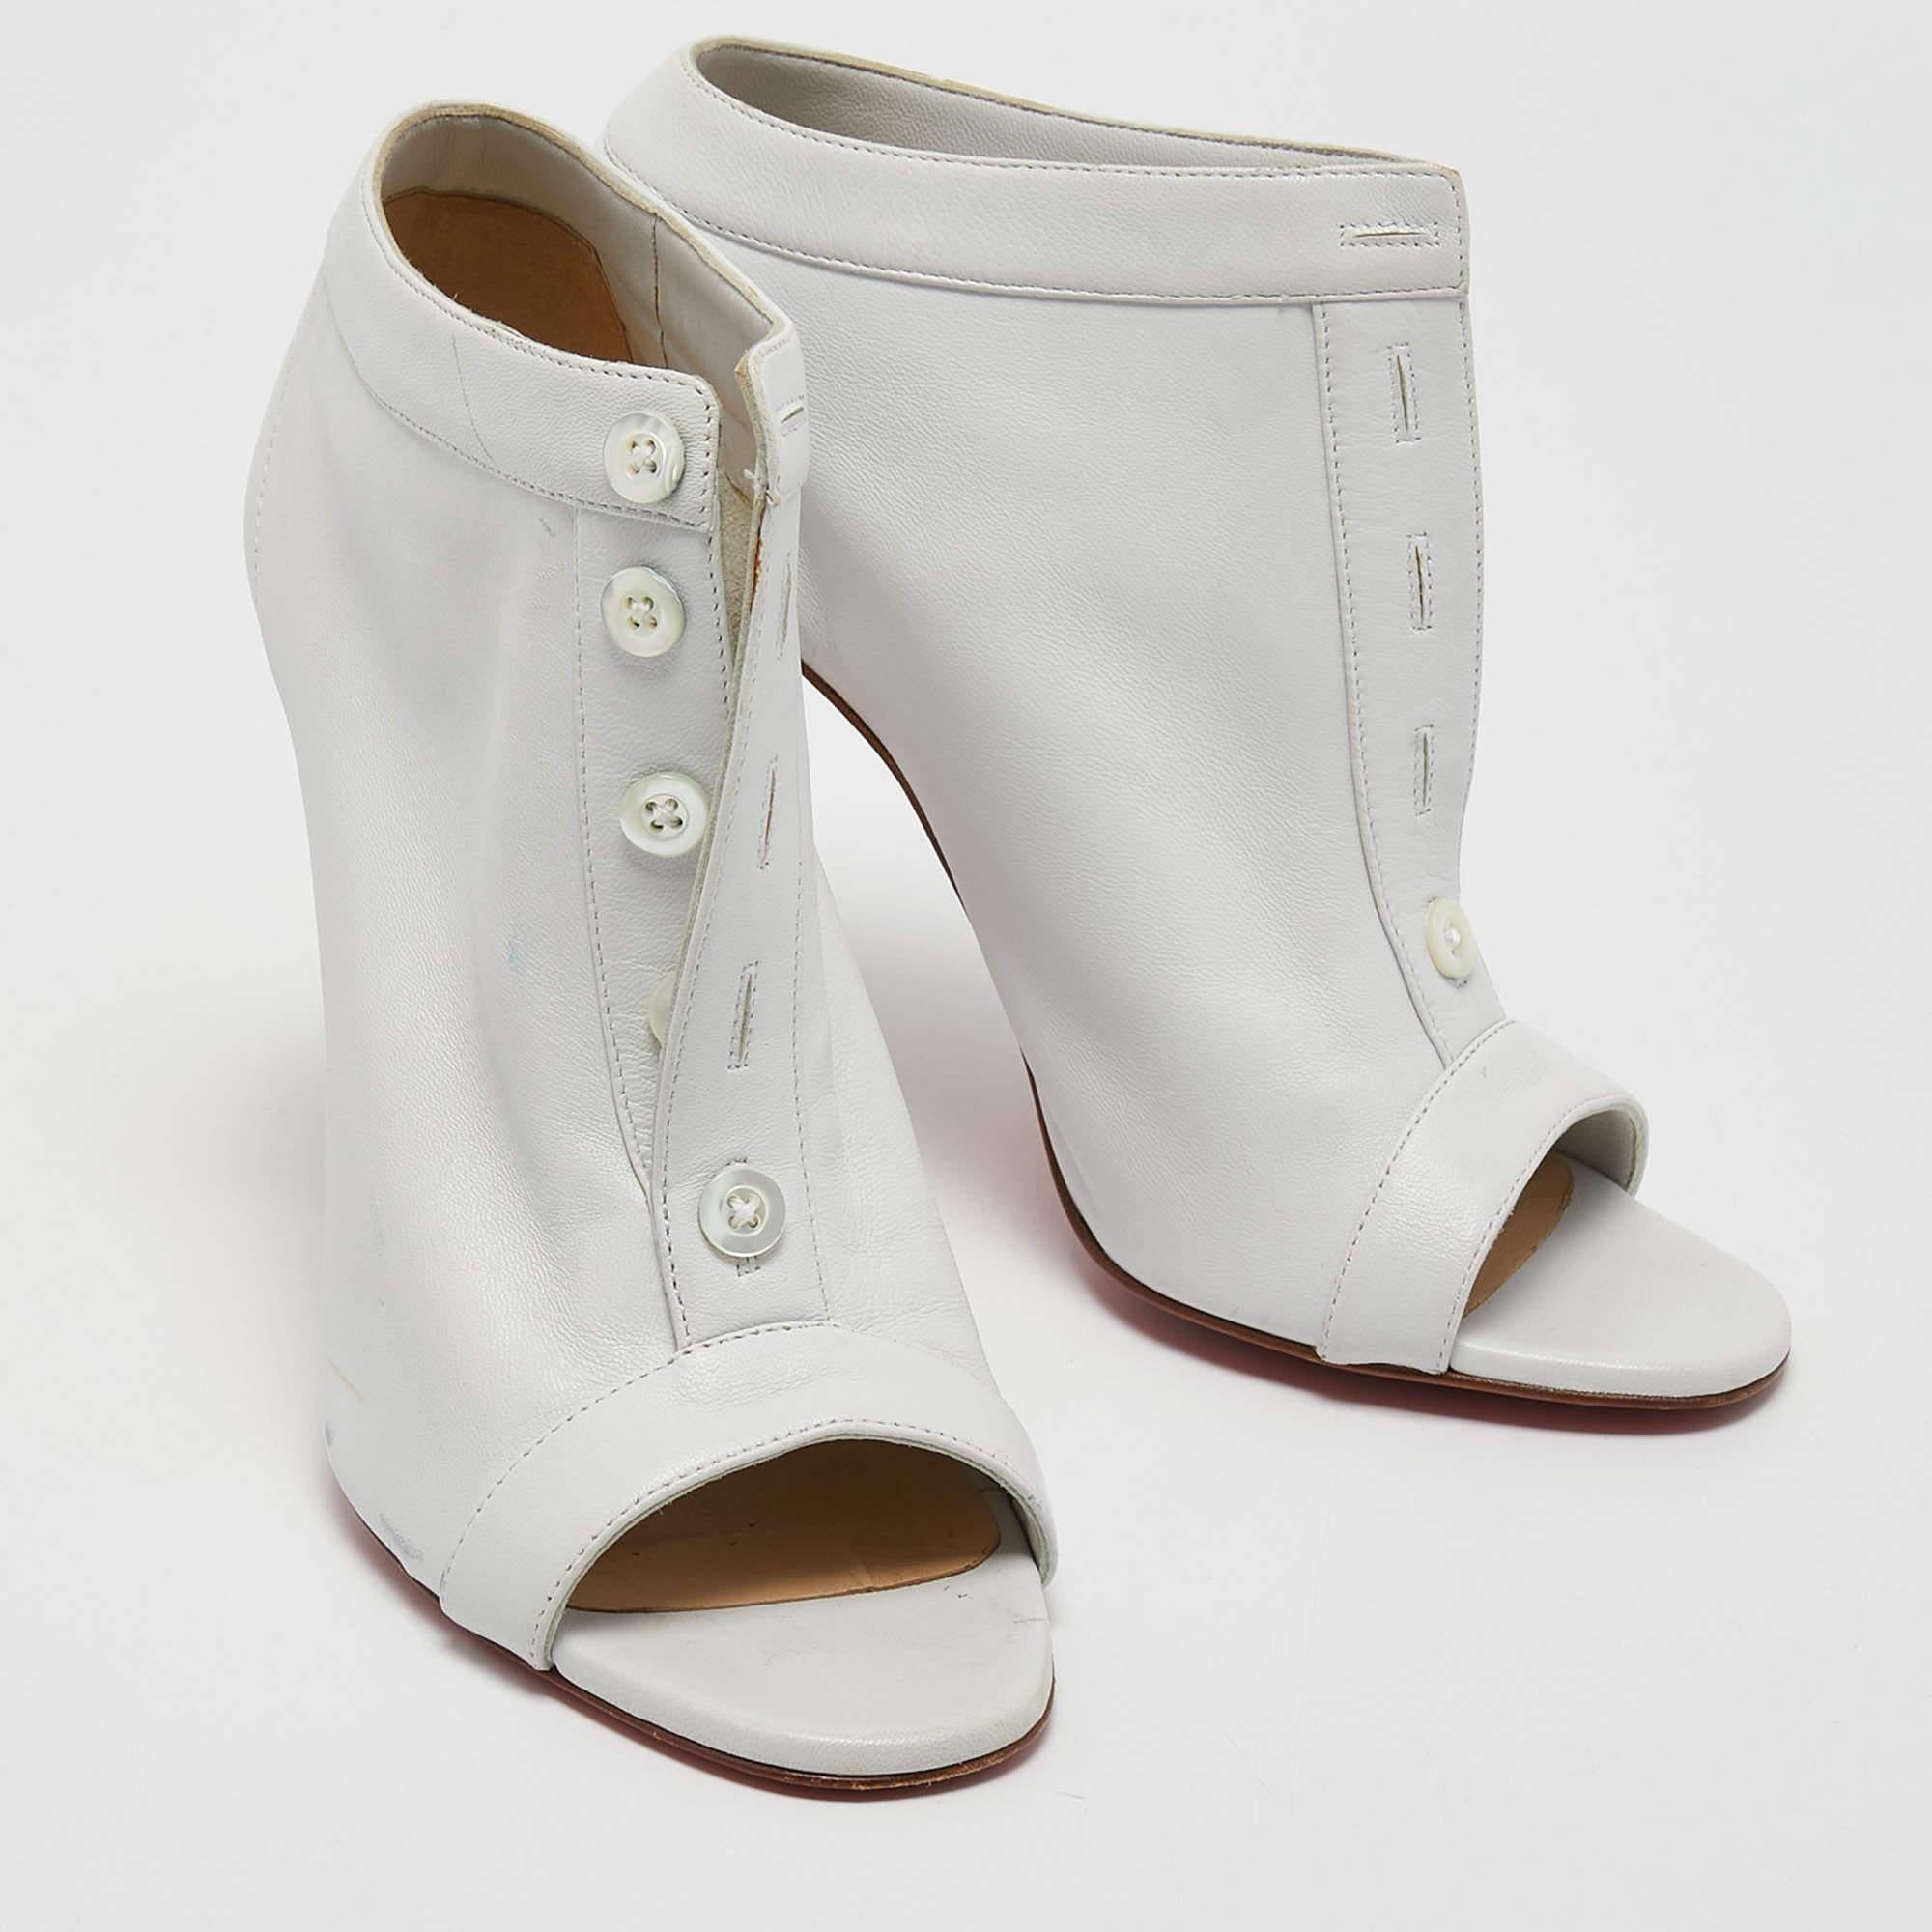 Women's Christian Louboutin White Leather Maotic Boots Size 38